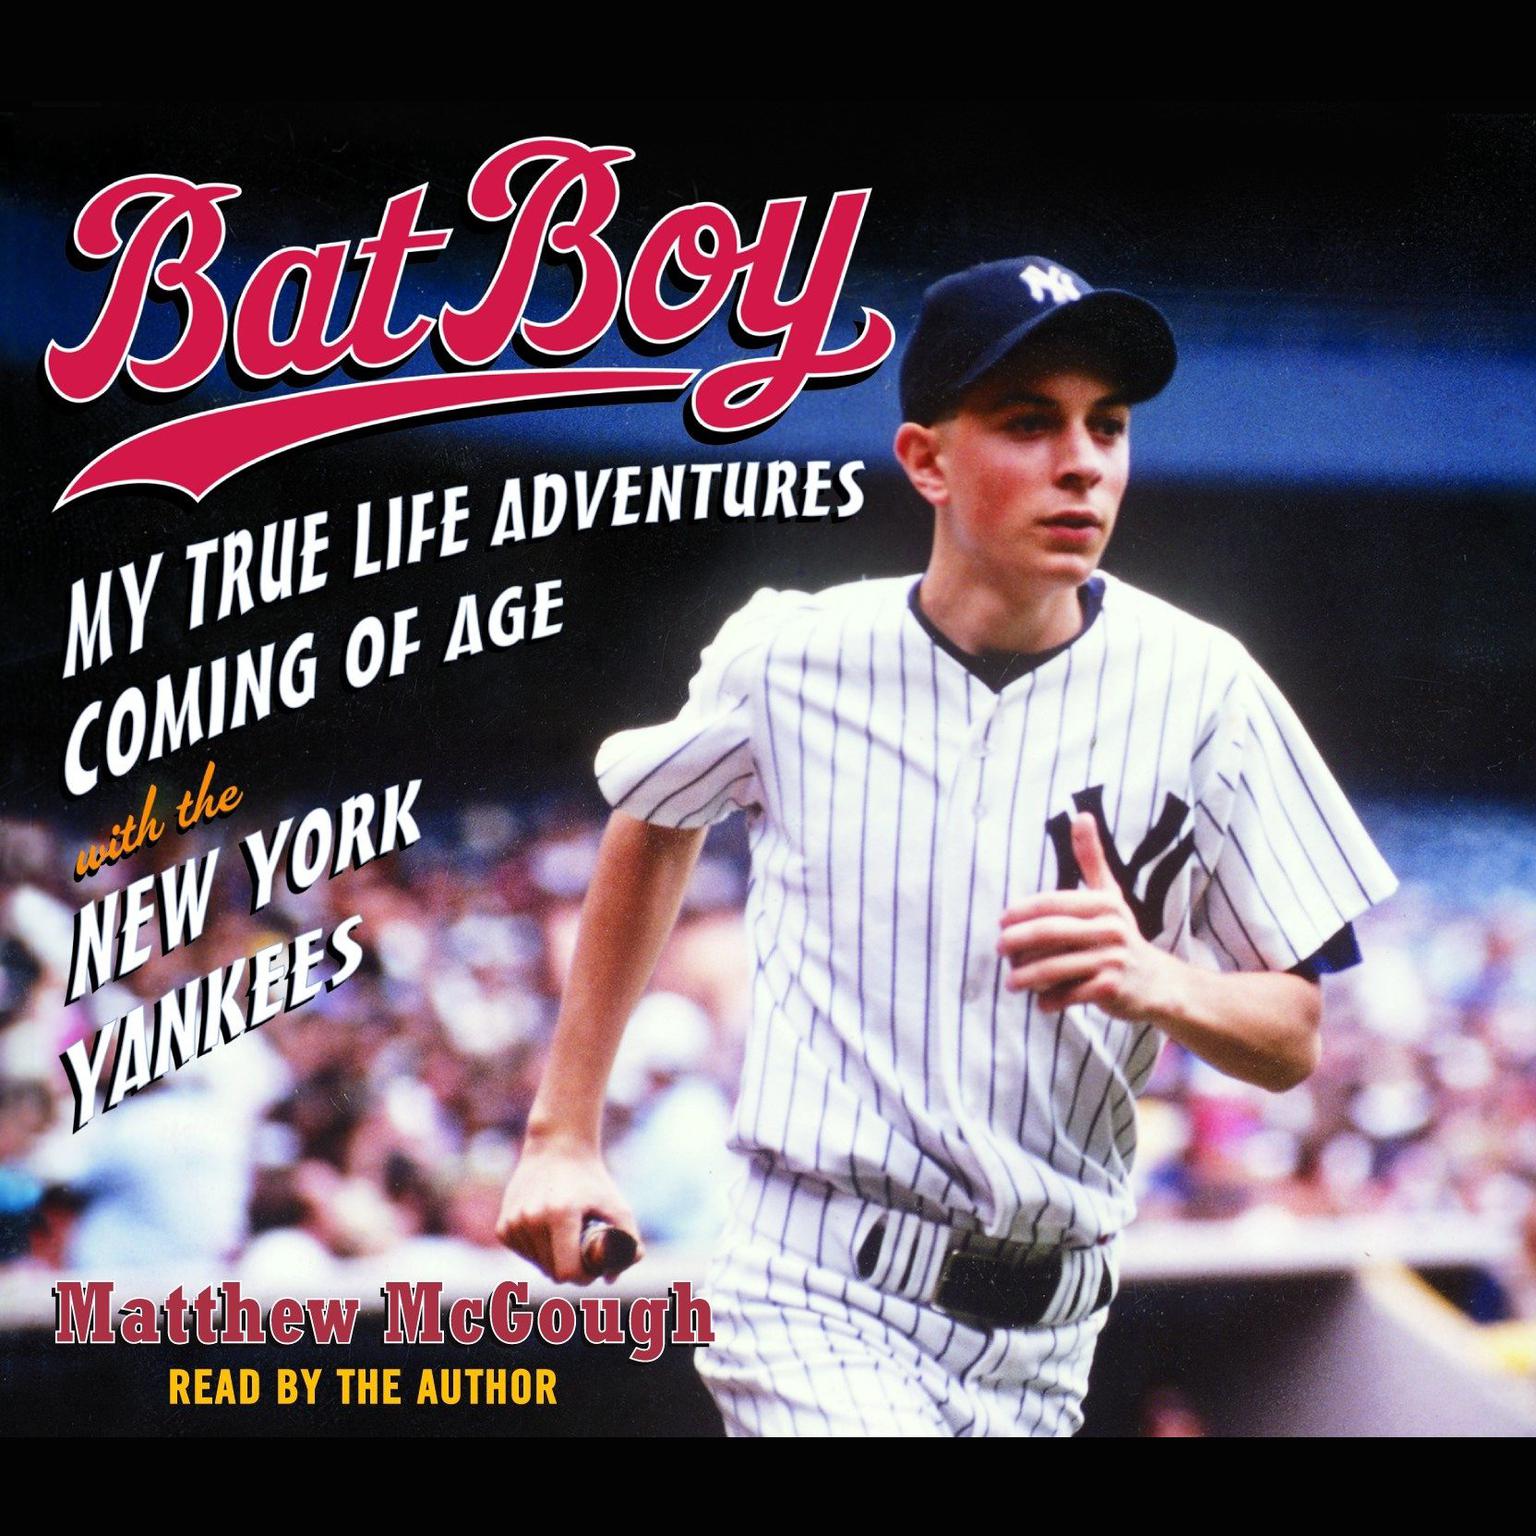 Bat Boy: My True Life Adventures Coming of Age with the New York Yankees Audiobook, by Matthew McGough